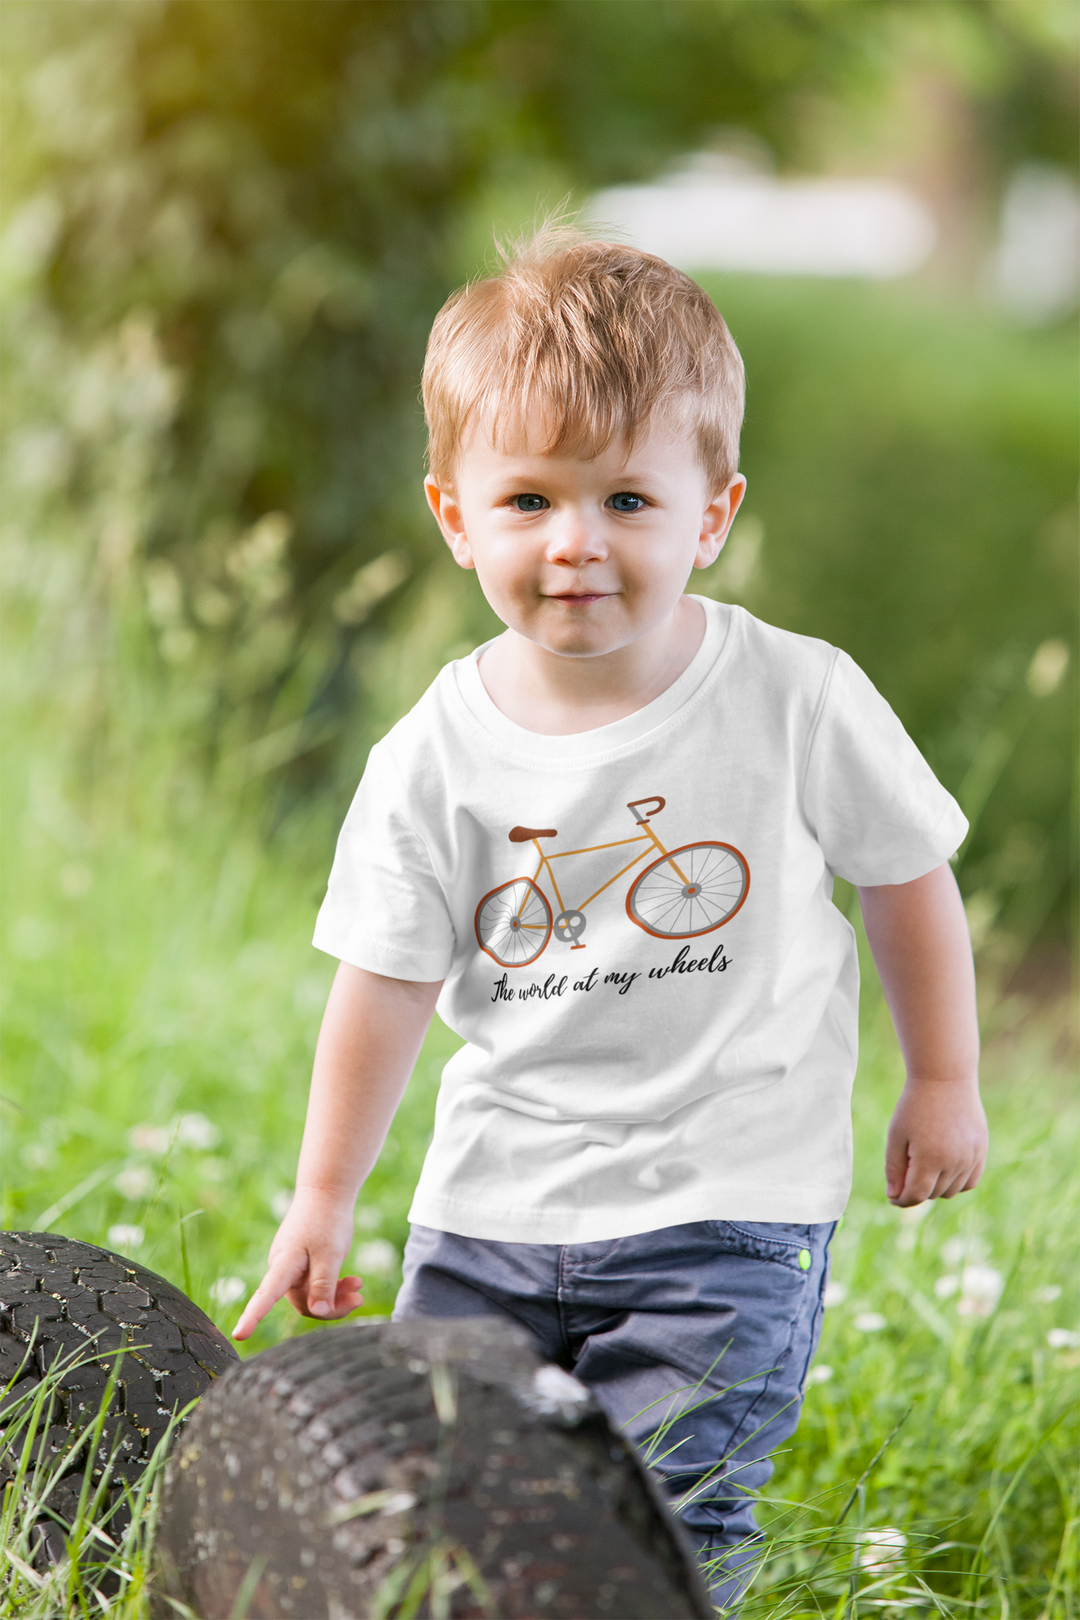 The world at my wheels. T-shirts for toddlers and kids up for a biking adventure. - TeesForToddlersandKids -  t-shirt - biking - the-world-at-my-wheels-short-sleeve-t-shirt-for-toddler-and-kids-the-biking-series